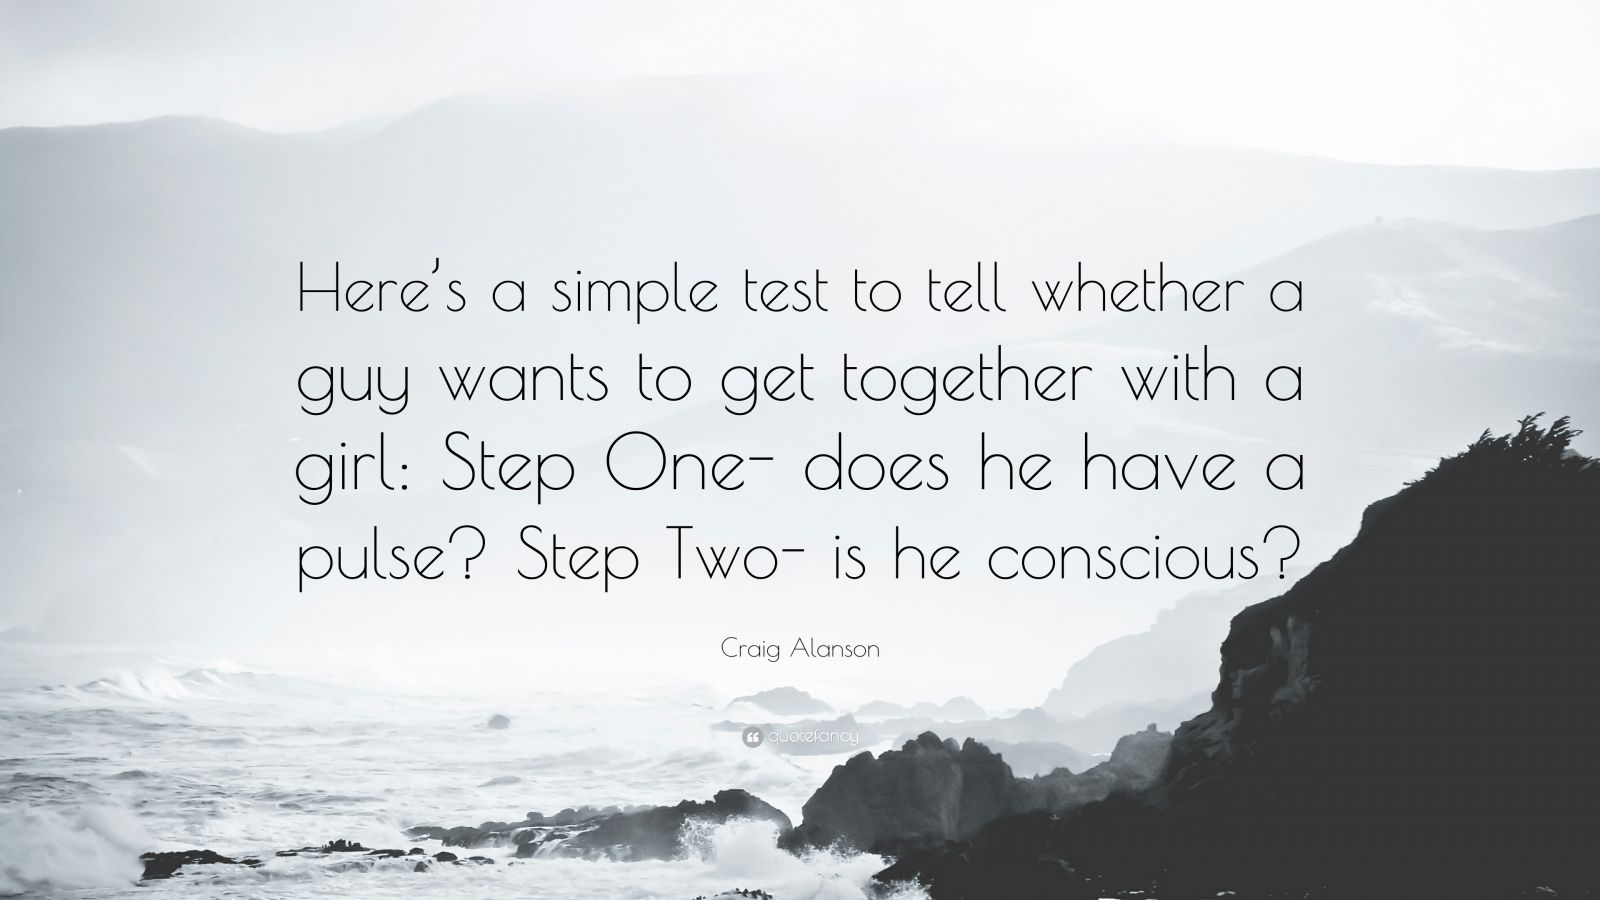 Craig Alanson Quote: “Here's a simple test to tell whether a guy